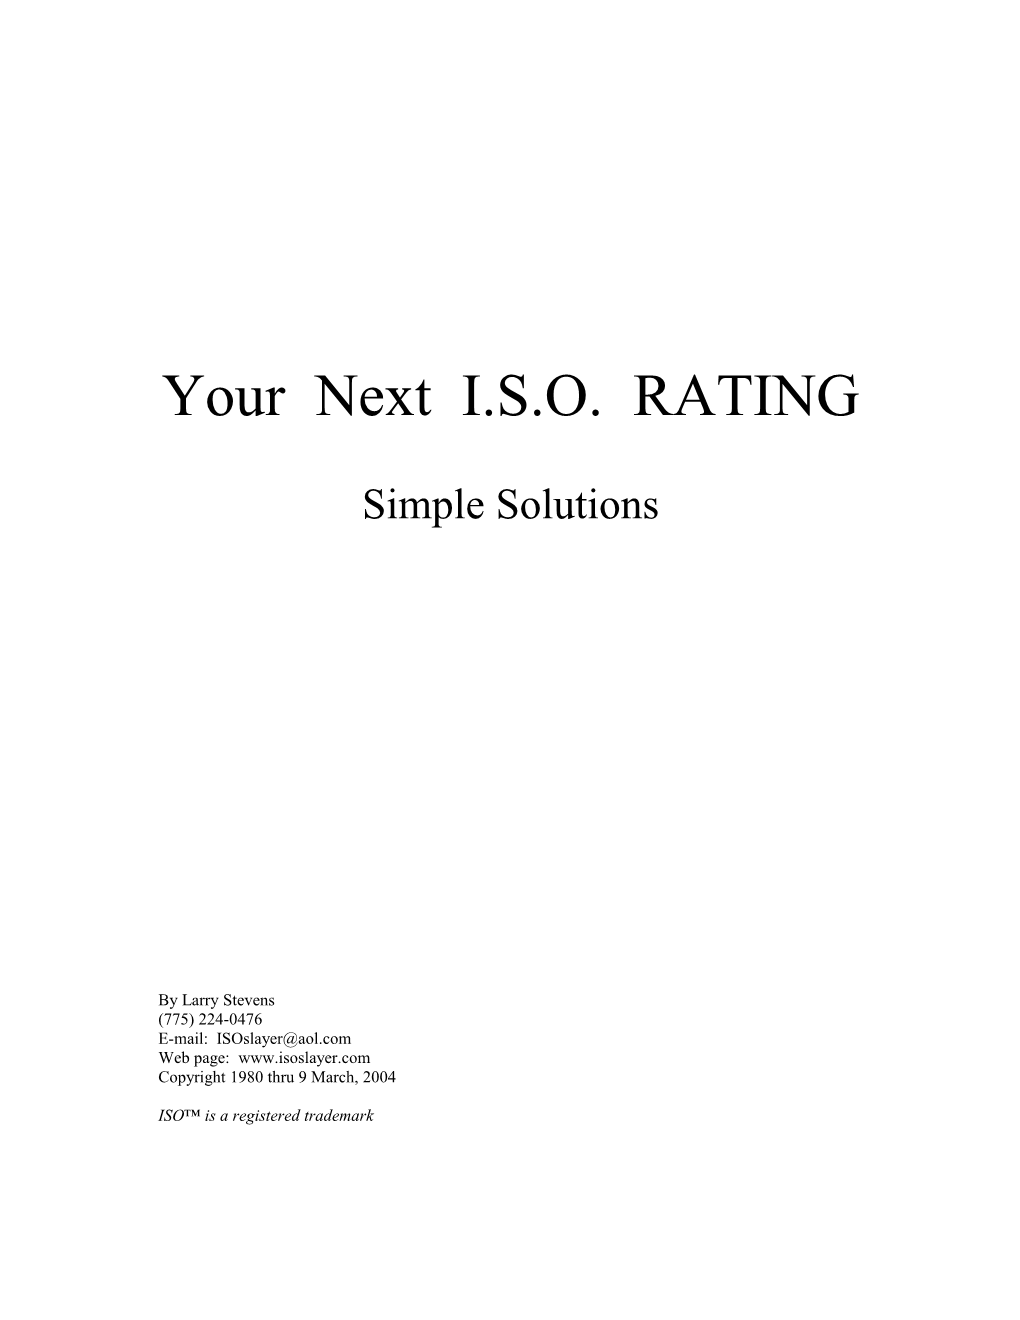 Your Next I.S.O. RATING